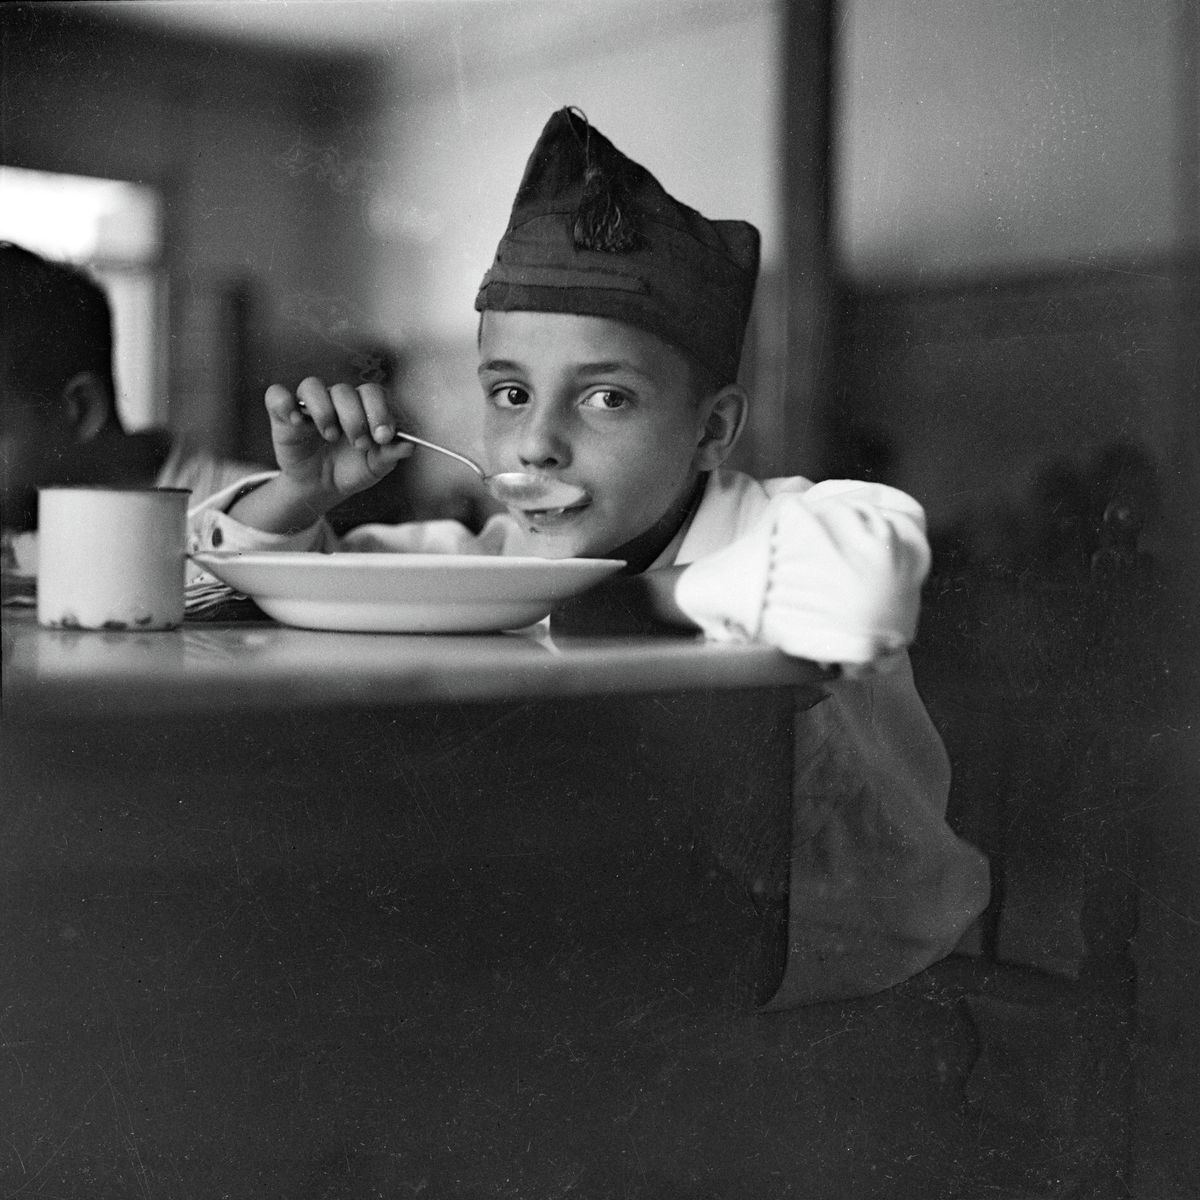 Child looking up from eating soup, Madrid by Gerda Taro - 1936-37